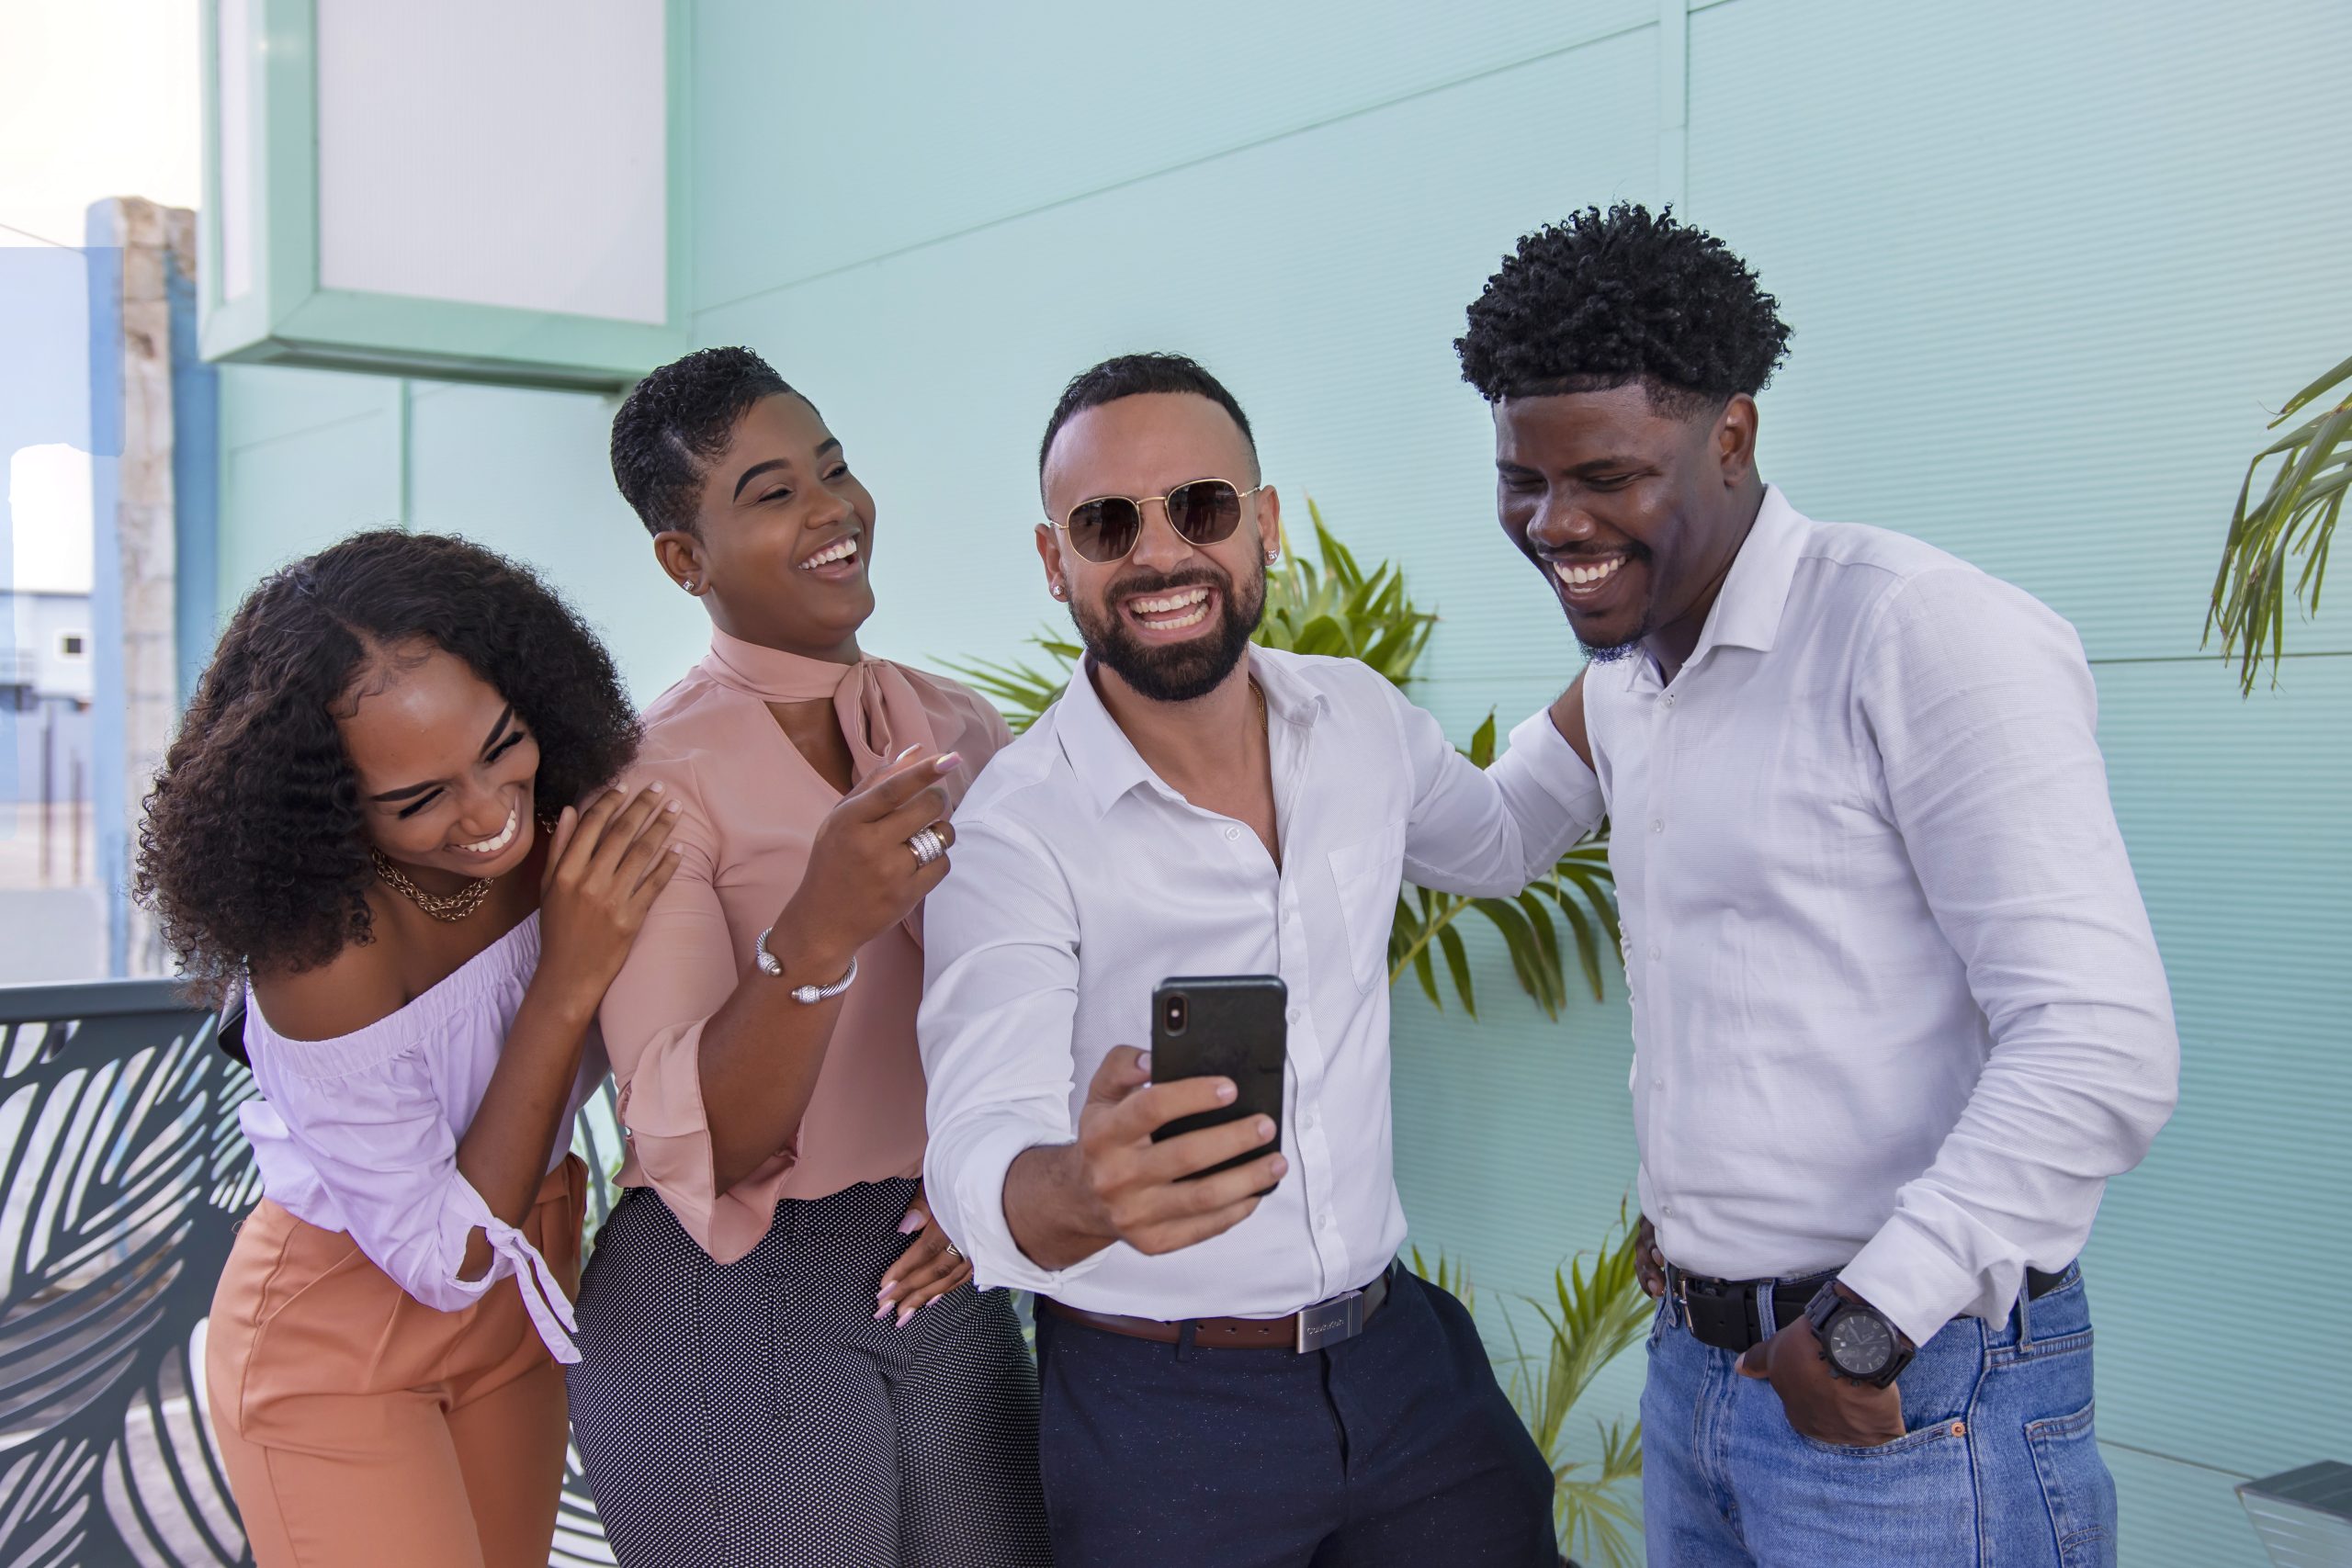 Man showing something on his phone to another man and two woman. They are all laughing.